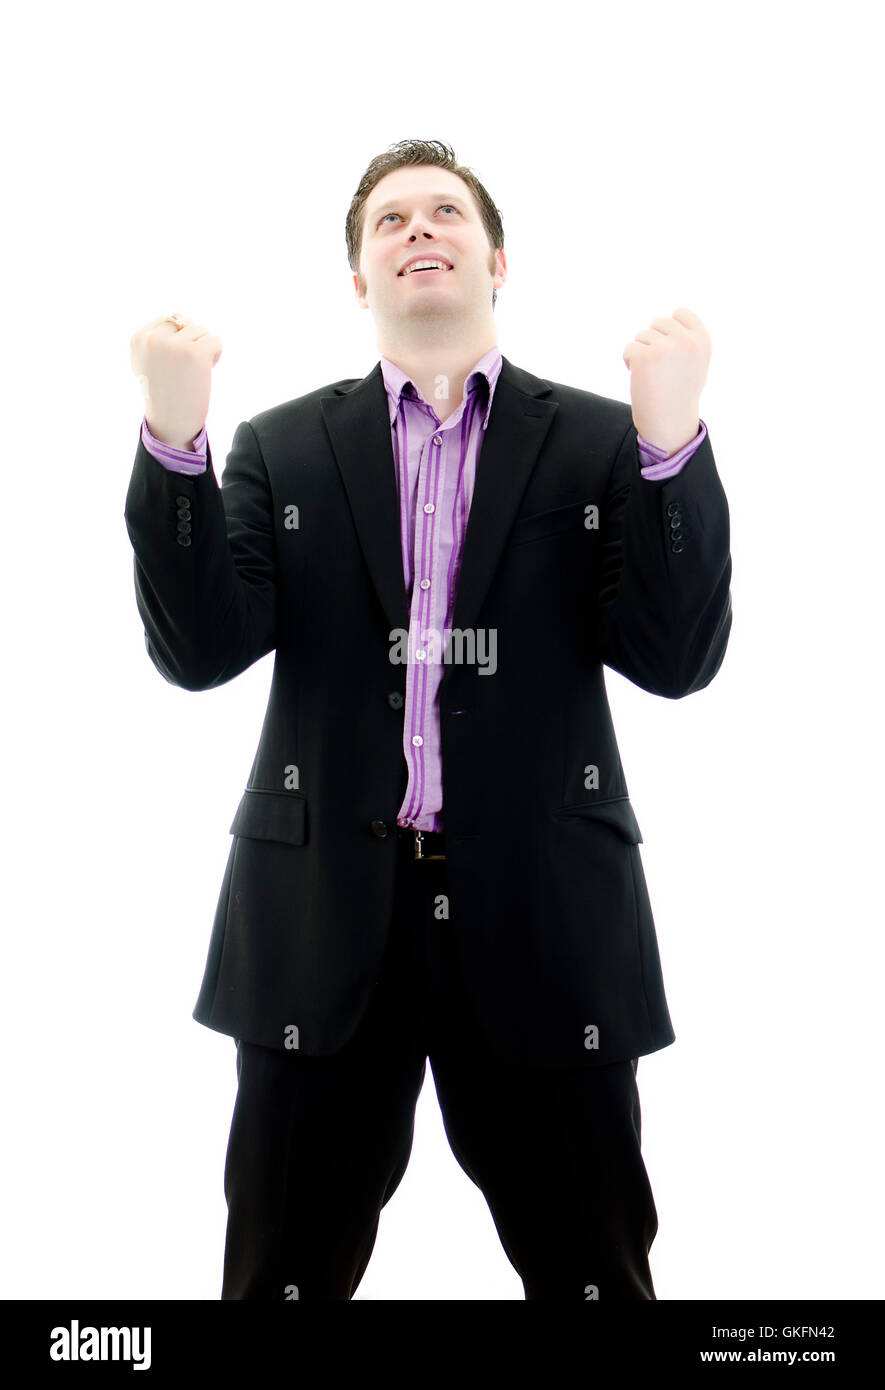 Portrait of a Happy young business man. Isolated on white background with copy space. Stock Photo